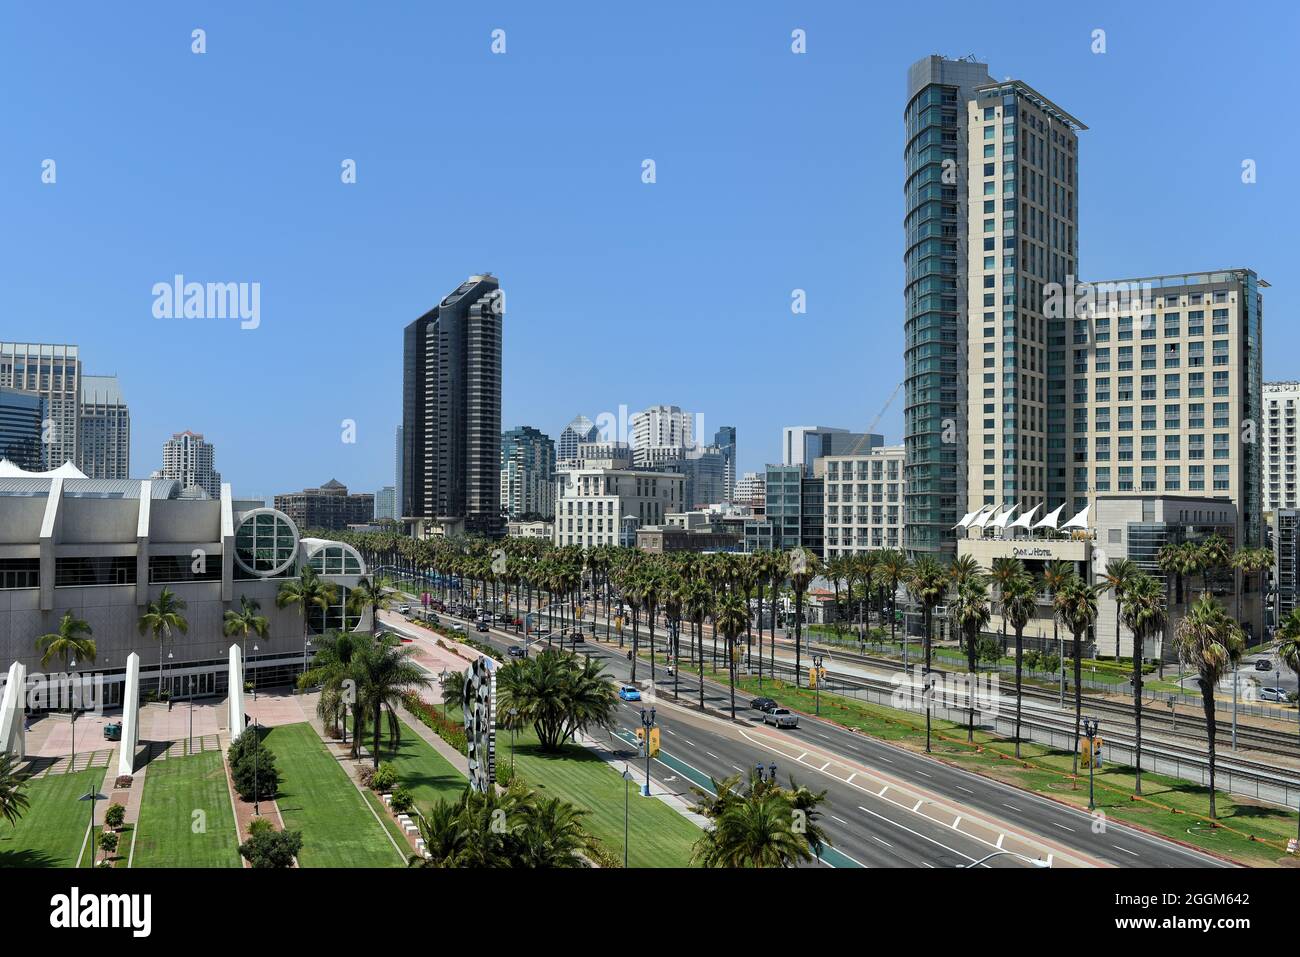 SAN DIEGO, CALIFORNIA - 25 AUG 2021: San Diego Convention Center and city skyline with High-Rise hotels. Stock Photo